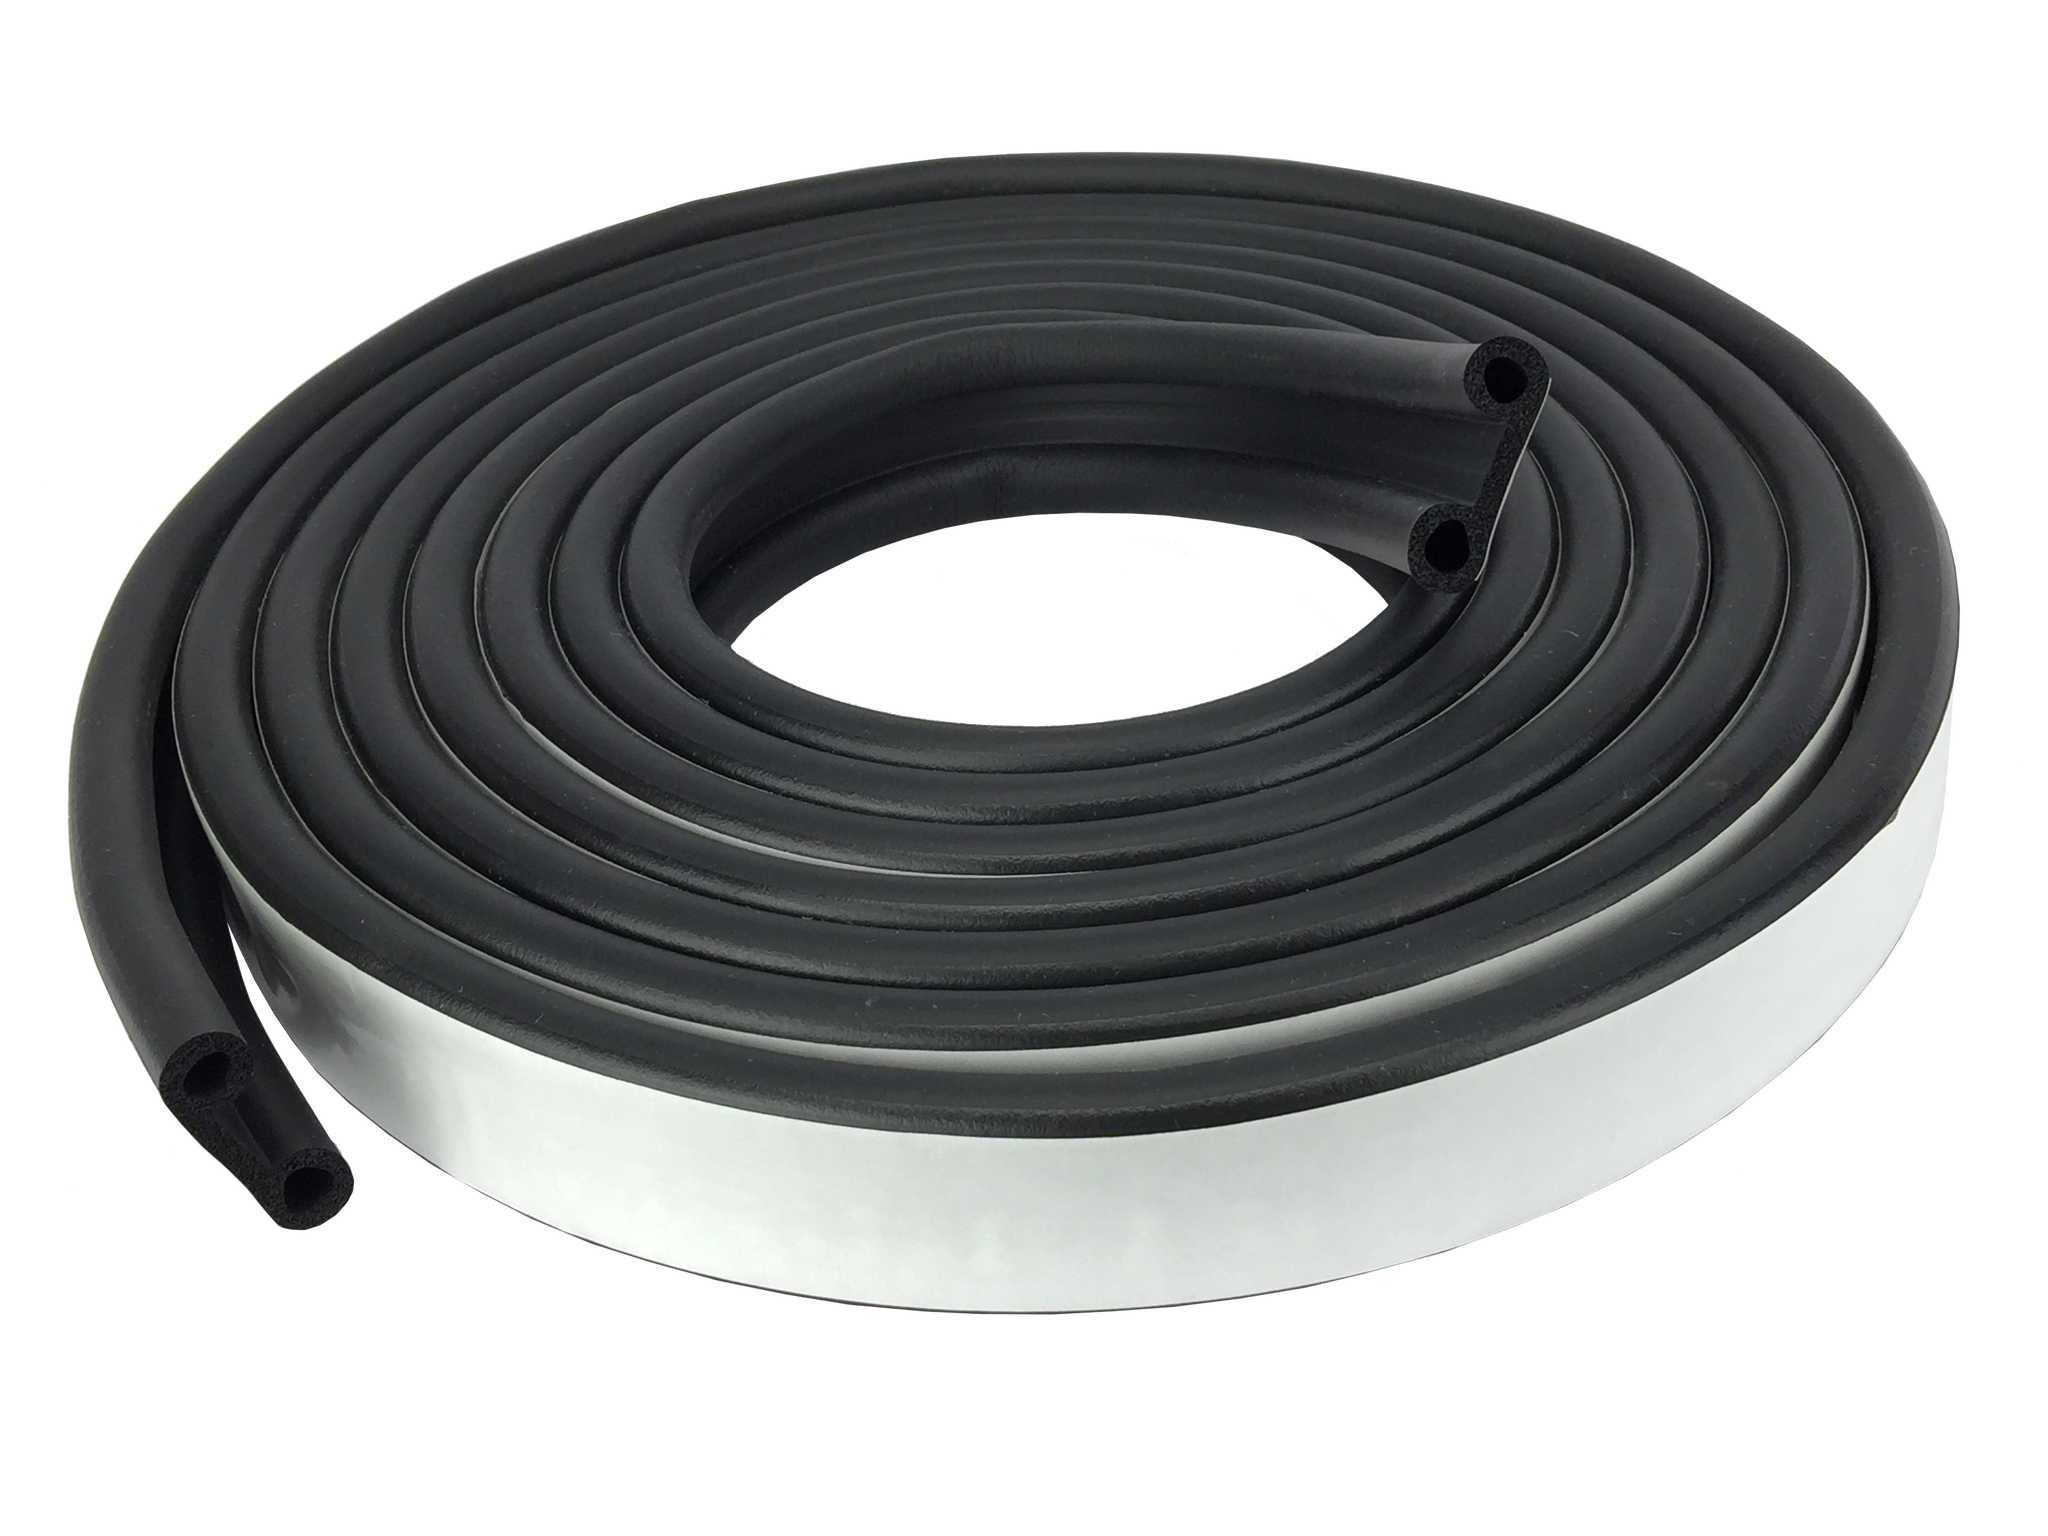 Super Cap Seal™ 20ft EPDM Rubber for Truck Cap, Camper Shell up to 200 lbs.